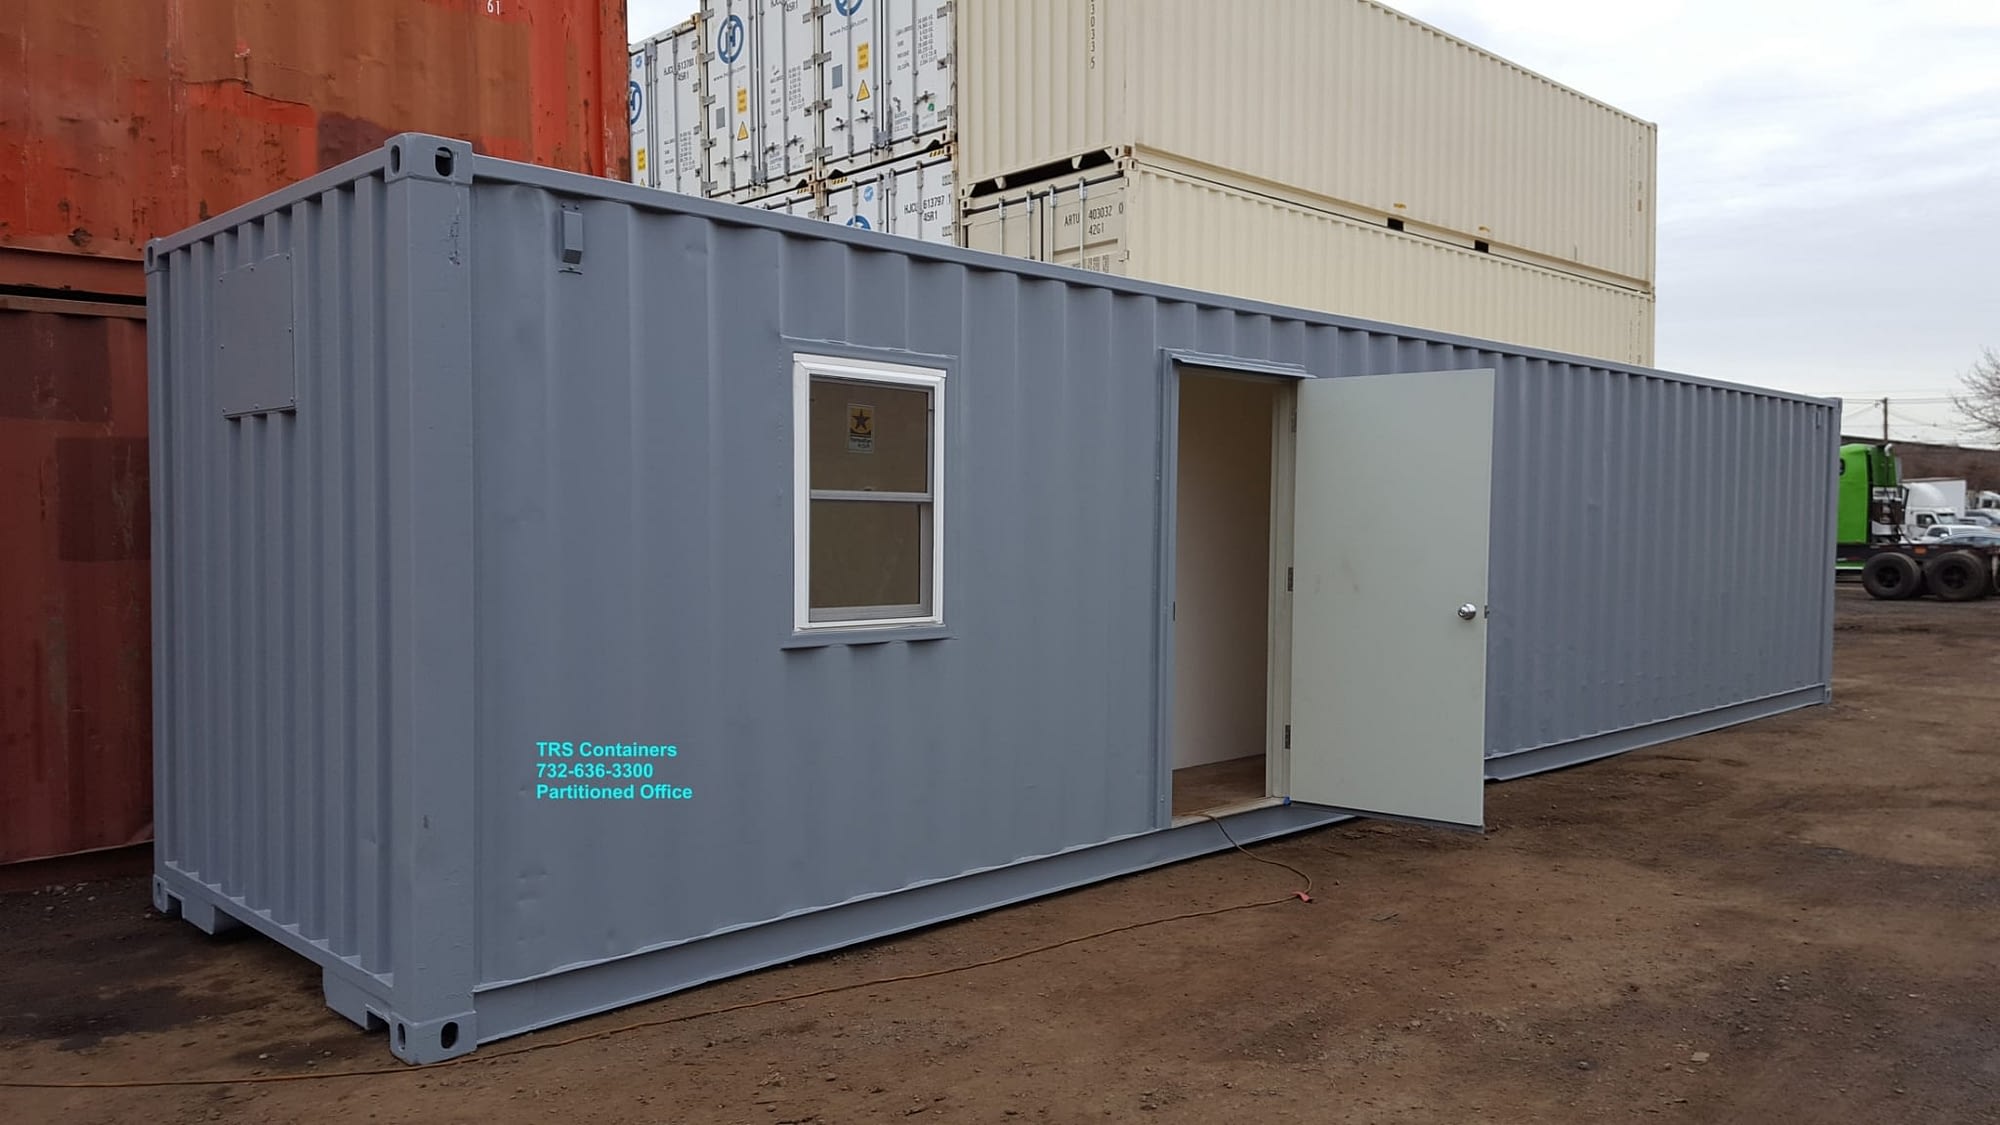 TRS Containers rents and sells modified ISO container space